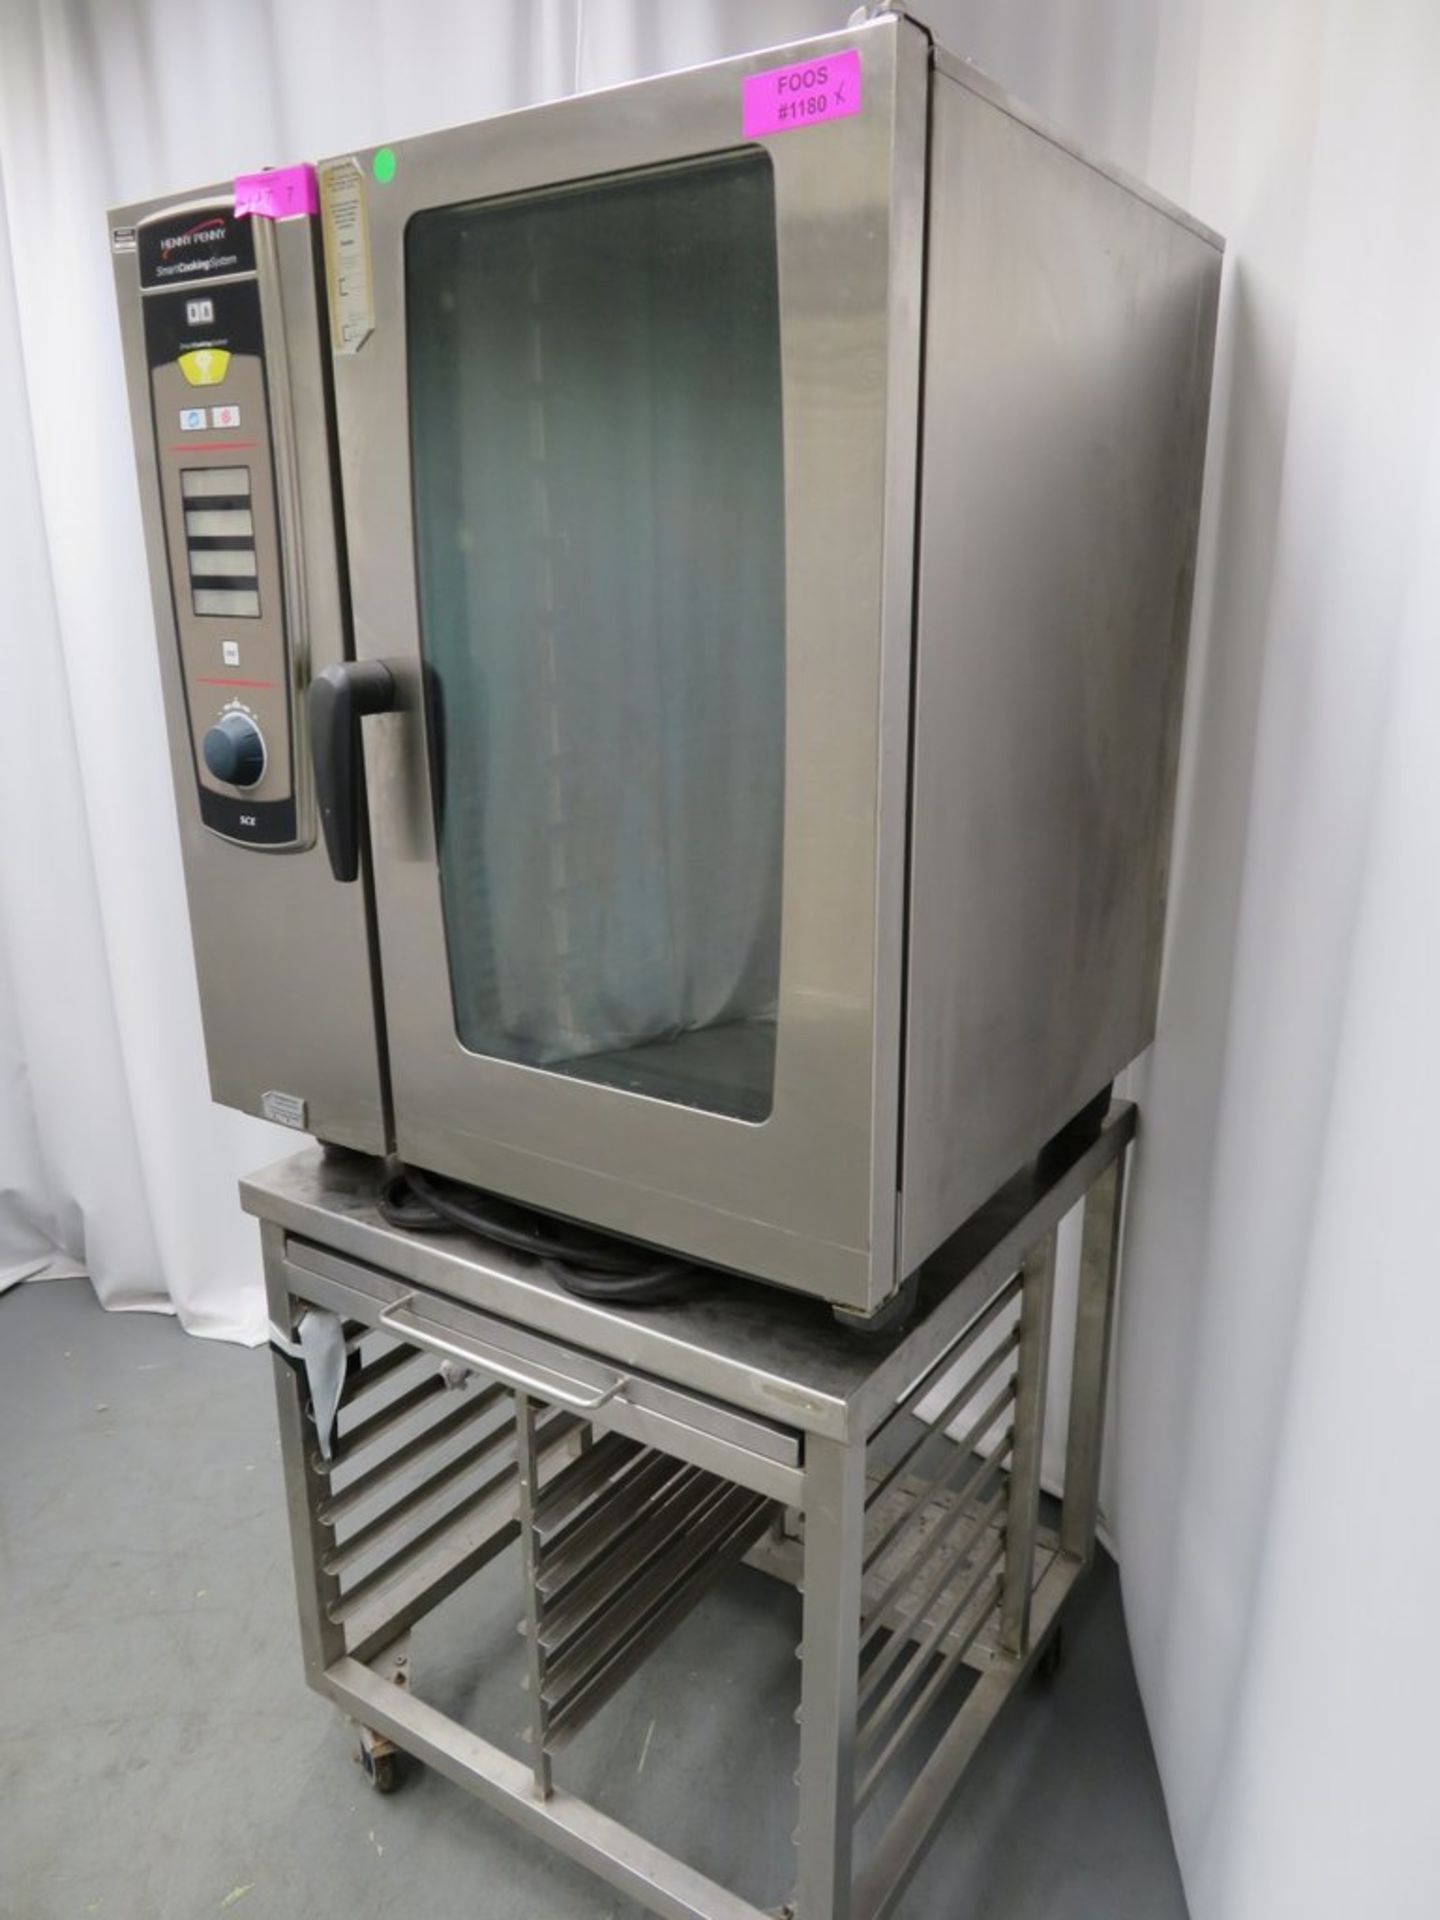 Henny Penny (Rational) SCE101 10 grid combi oven, 3 phase electric - Image 3 of 9